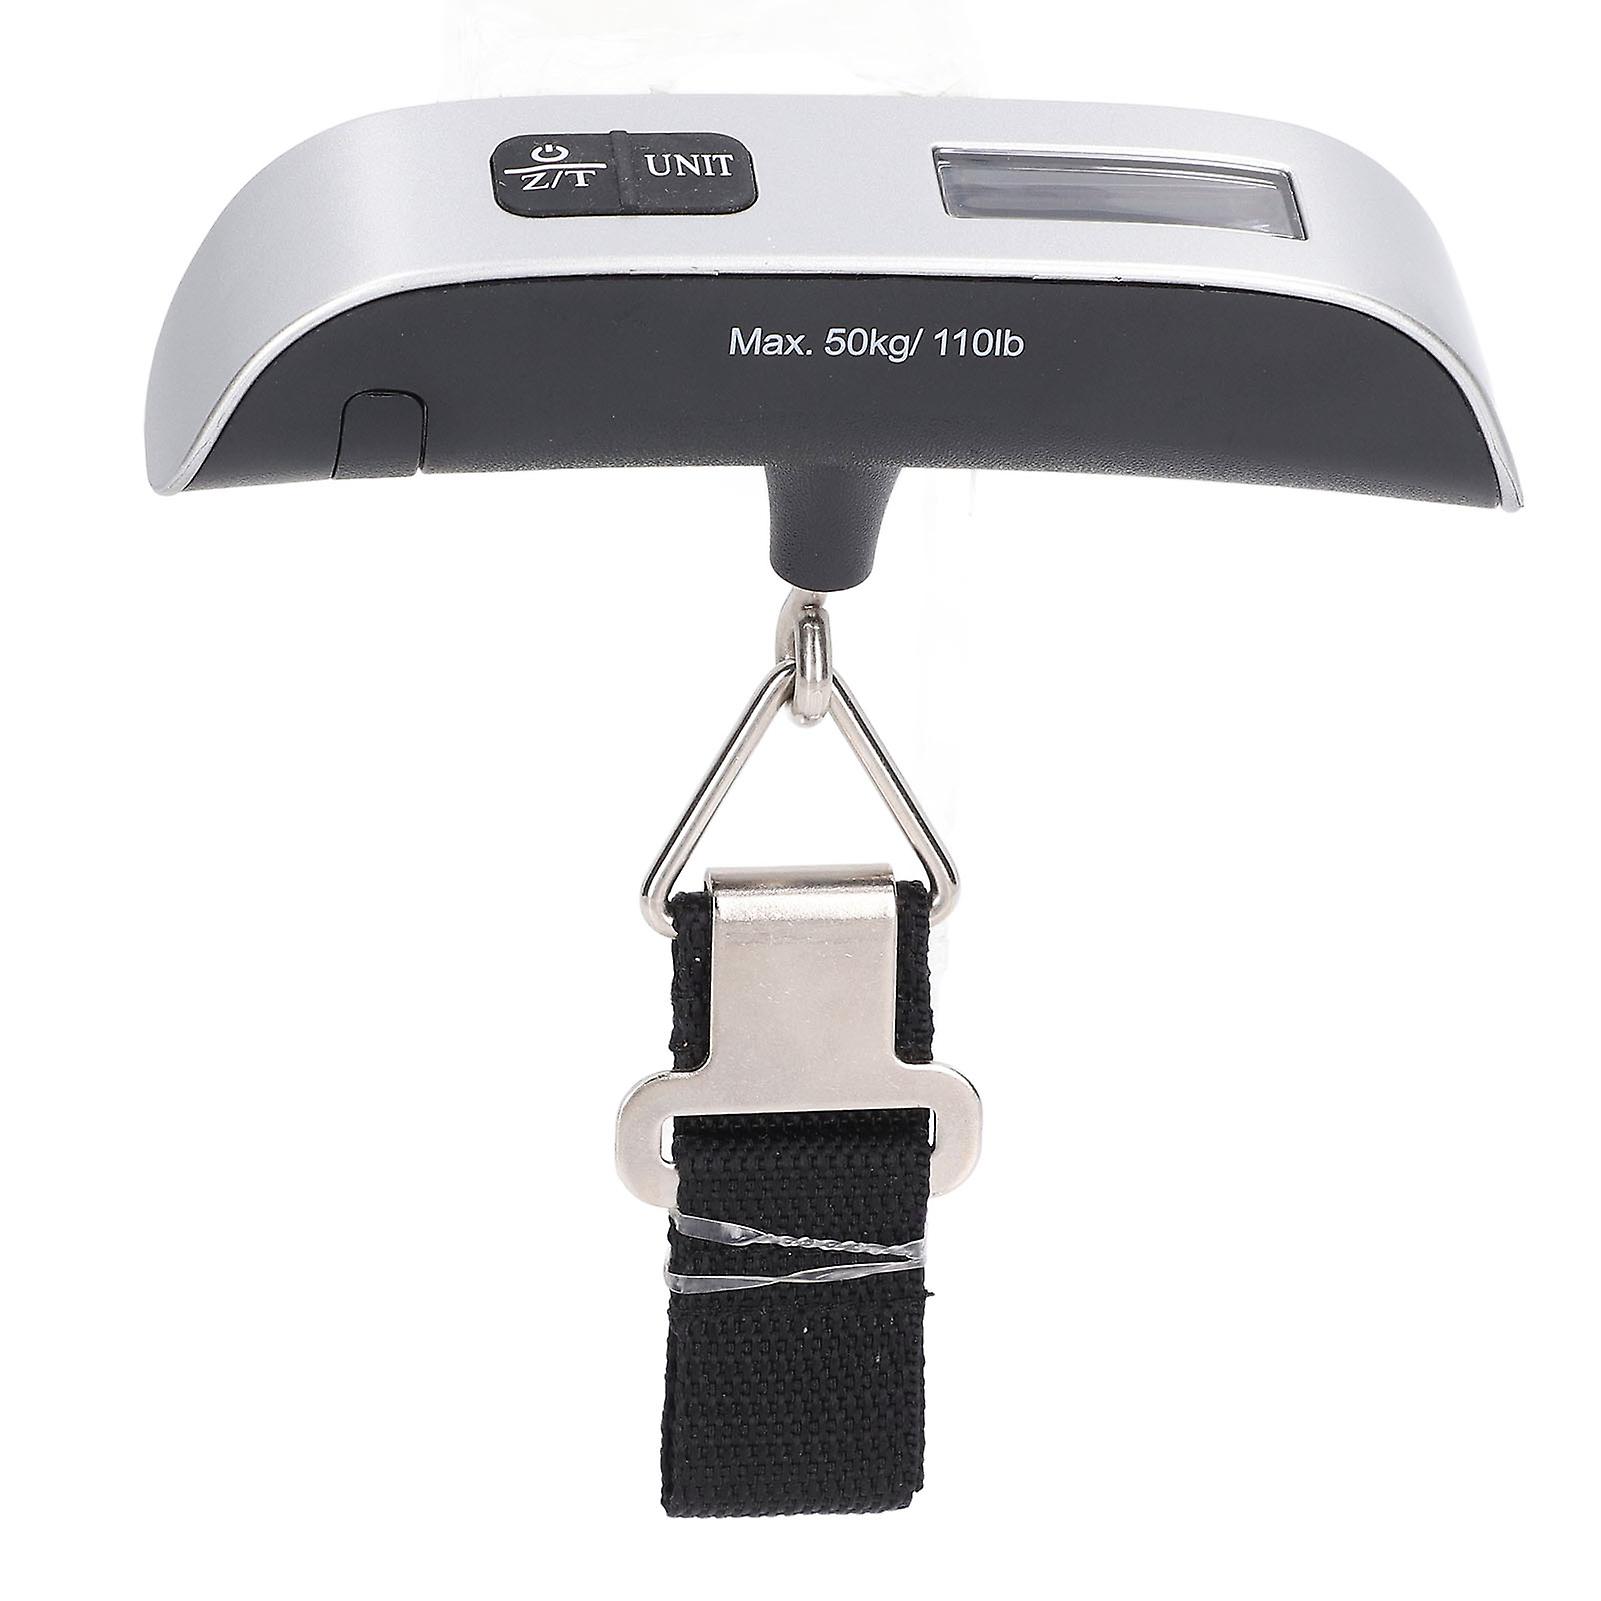 Lcd Display Portable Electronic Scale High Accuracy Digital Hanging Luggage Weighing Scale 50kg